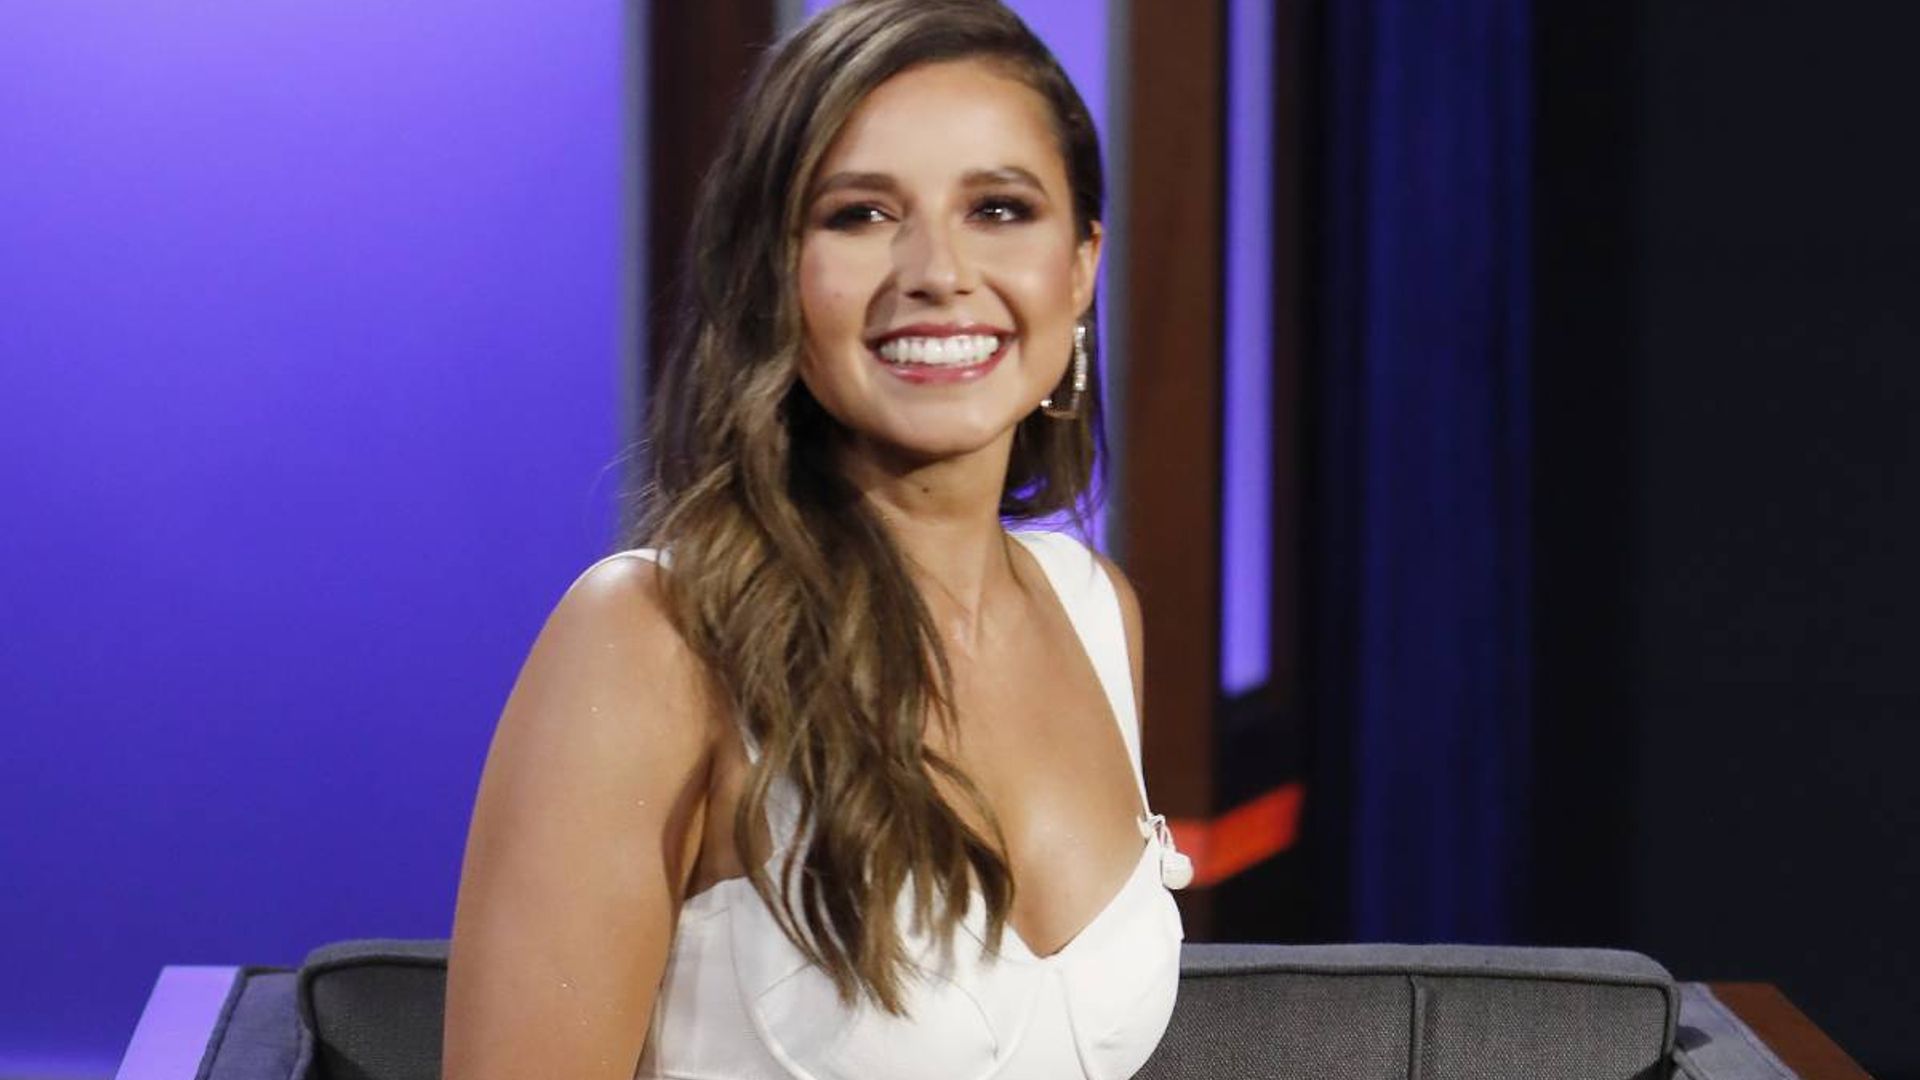 The Bachelorette: Everything we know about Katie Thurston and who will - Where Can I Watch Katie's Season Of The Bachelorette